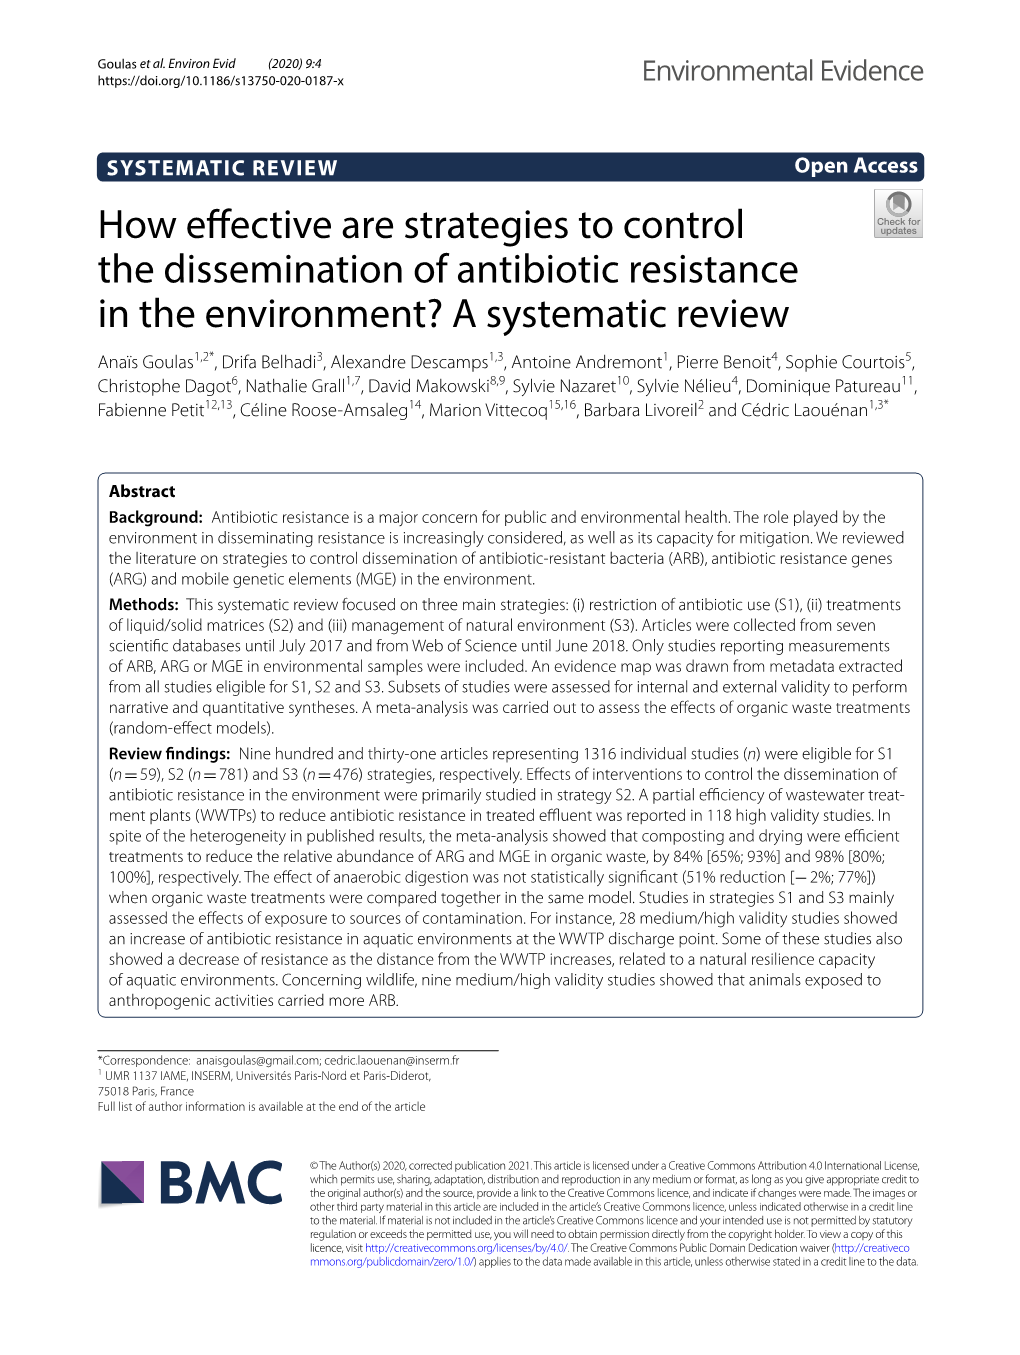 How Effective Are Strategies to Control the Dissemination of Antibiotic